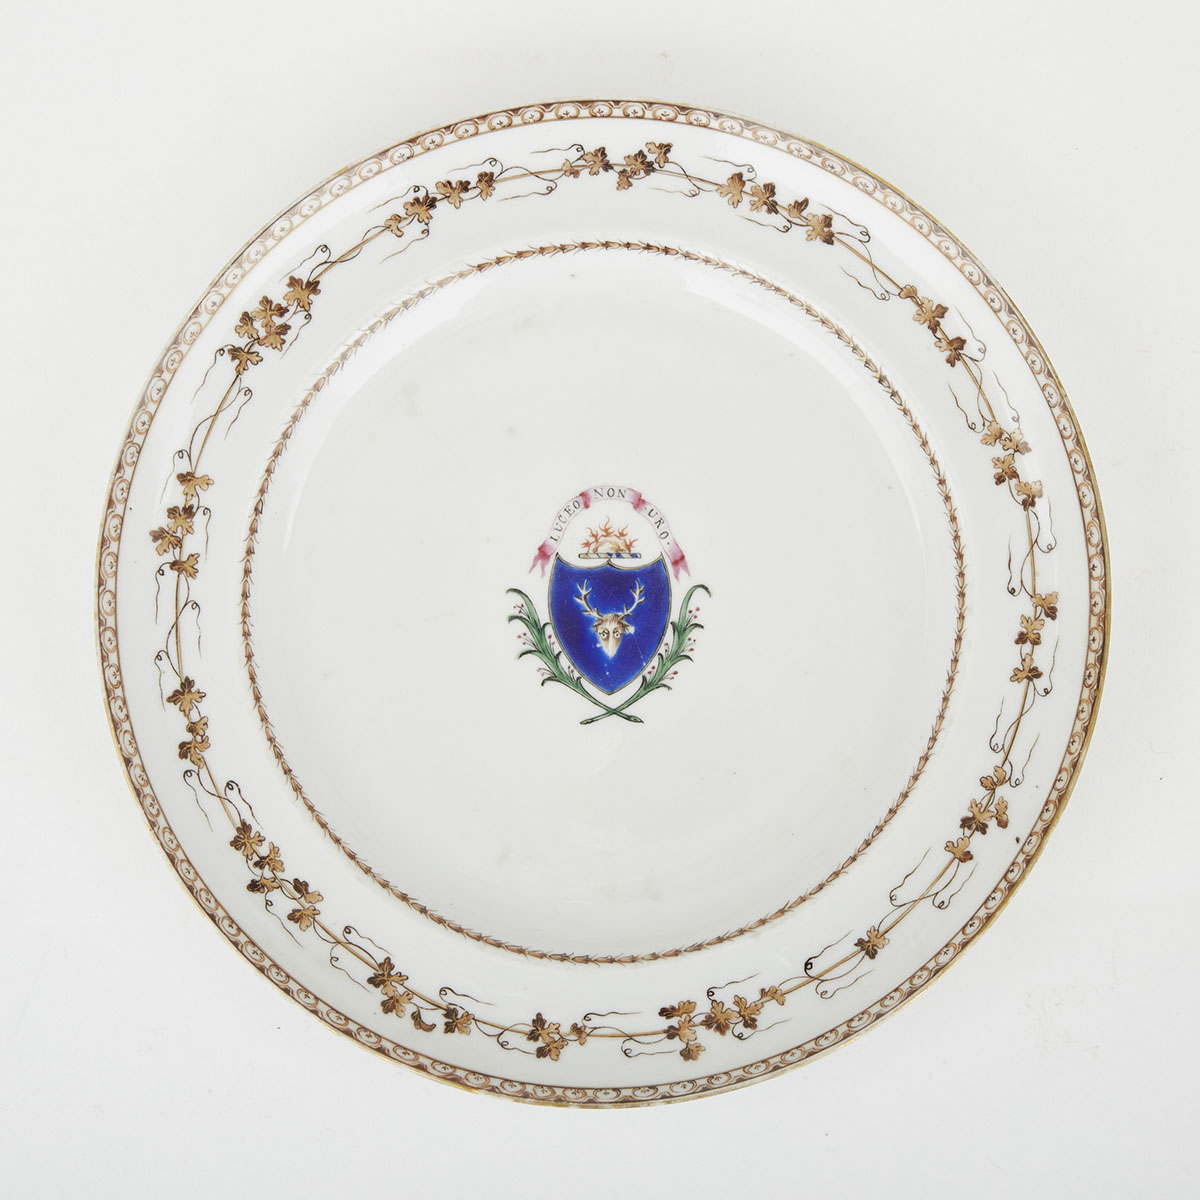 Chinese Export Porcelain Armorial Plate, c.1800